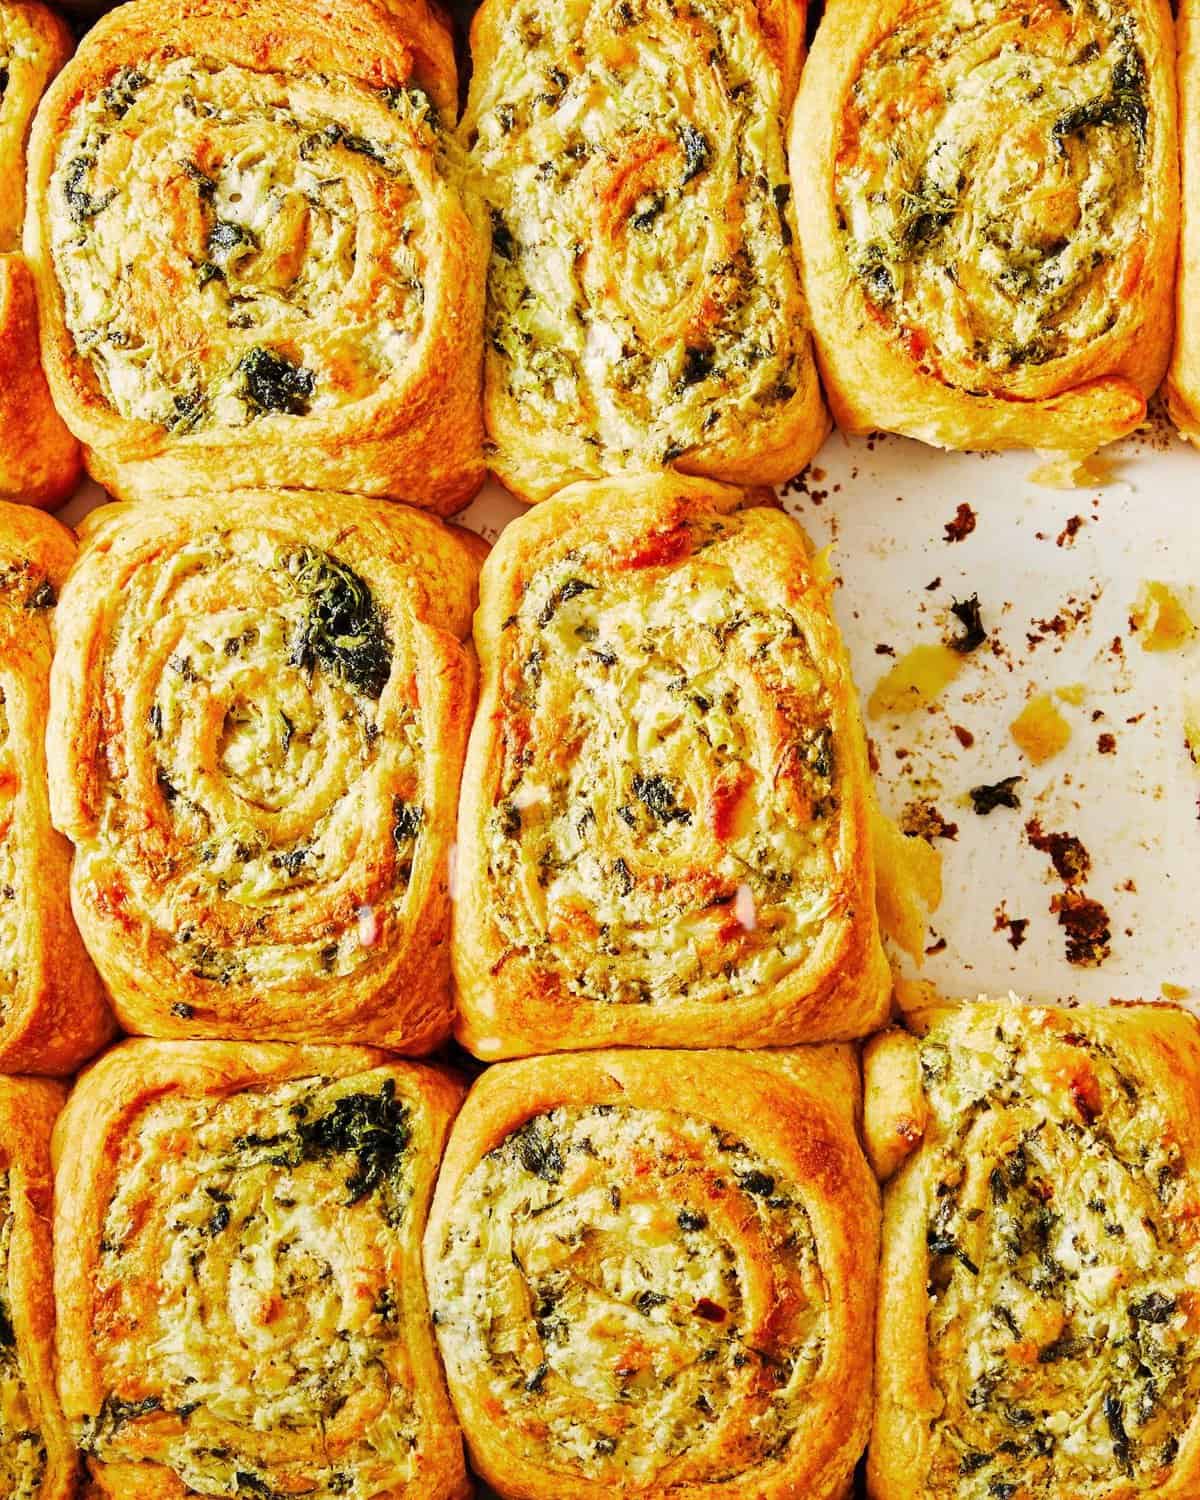  The subtle sweetness of these rolls pairs perfectly with any savory dish.